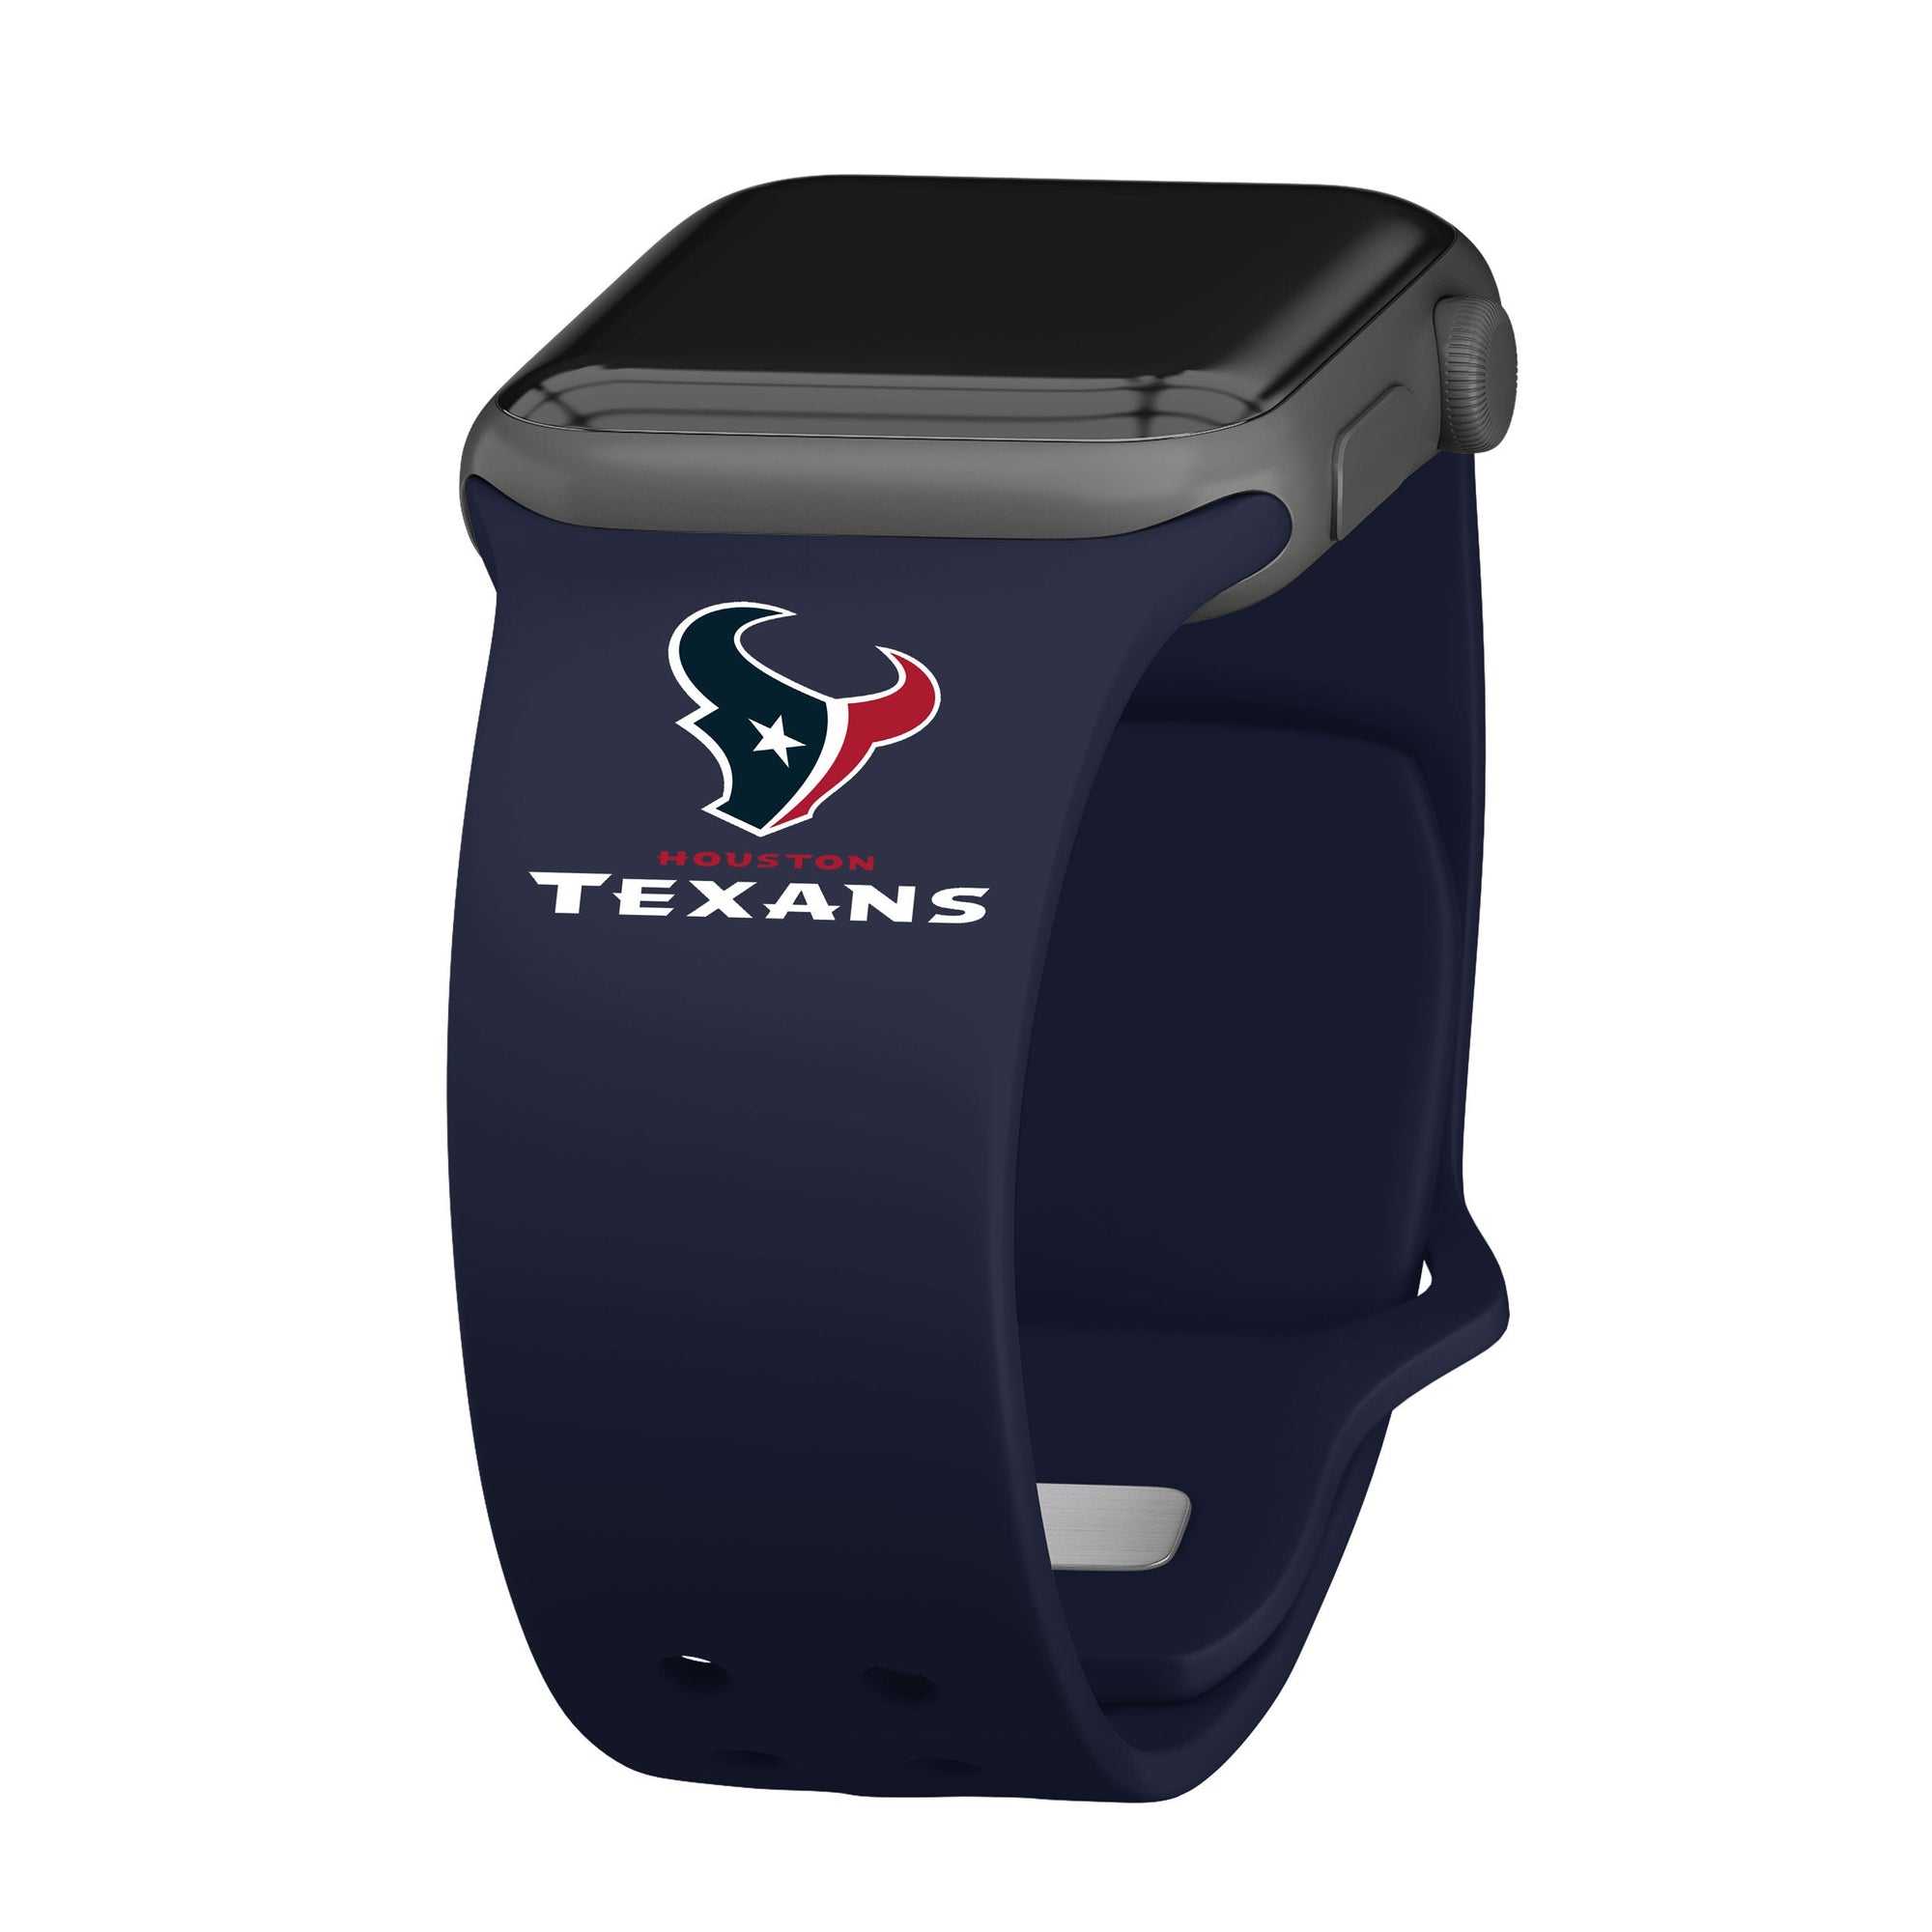 GAME TIME Houston Texans HD Elite Edition Apple Watch Band